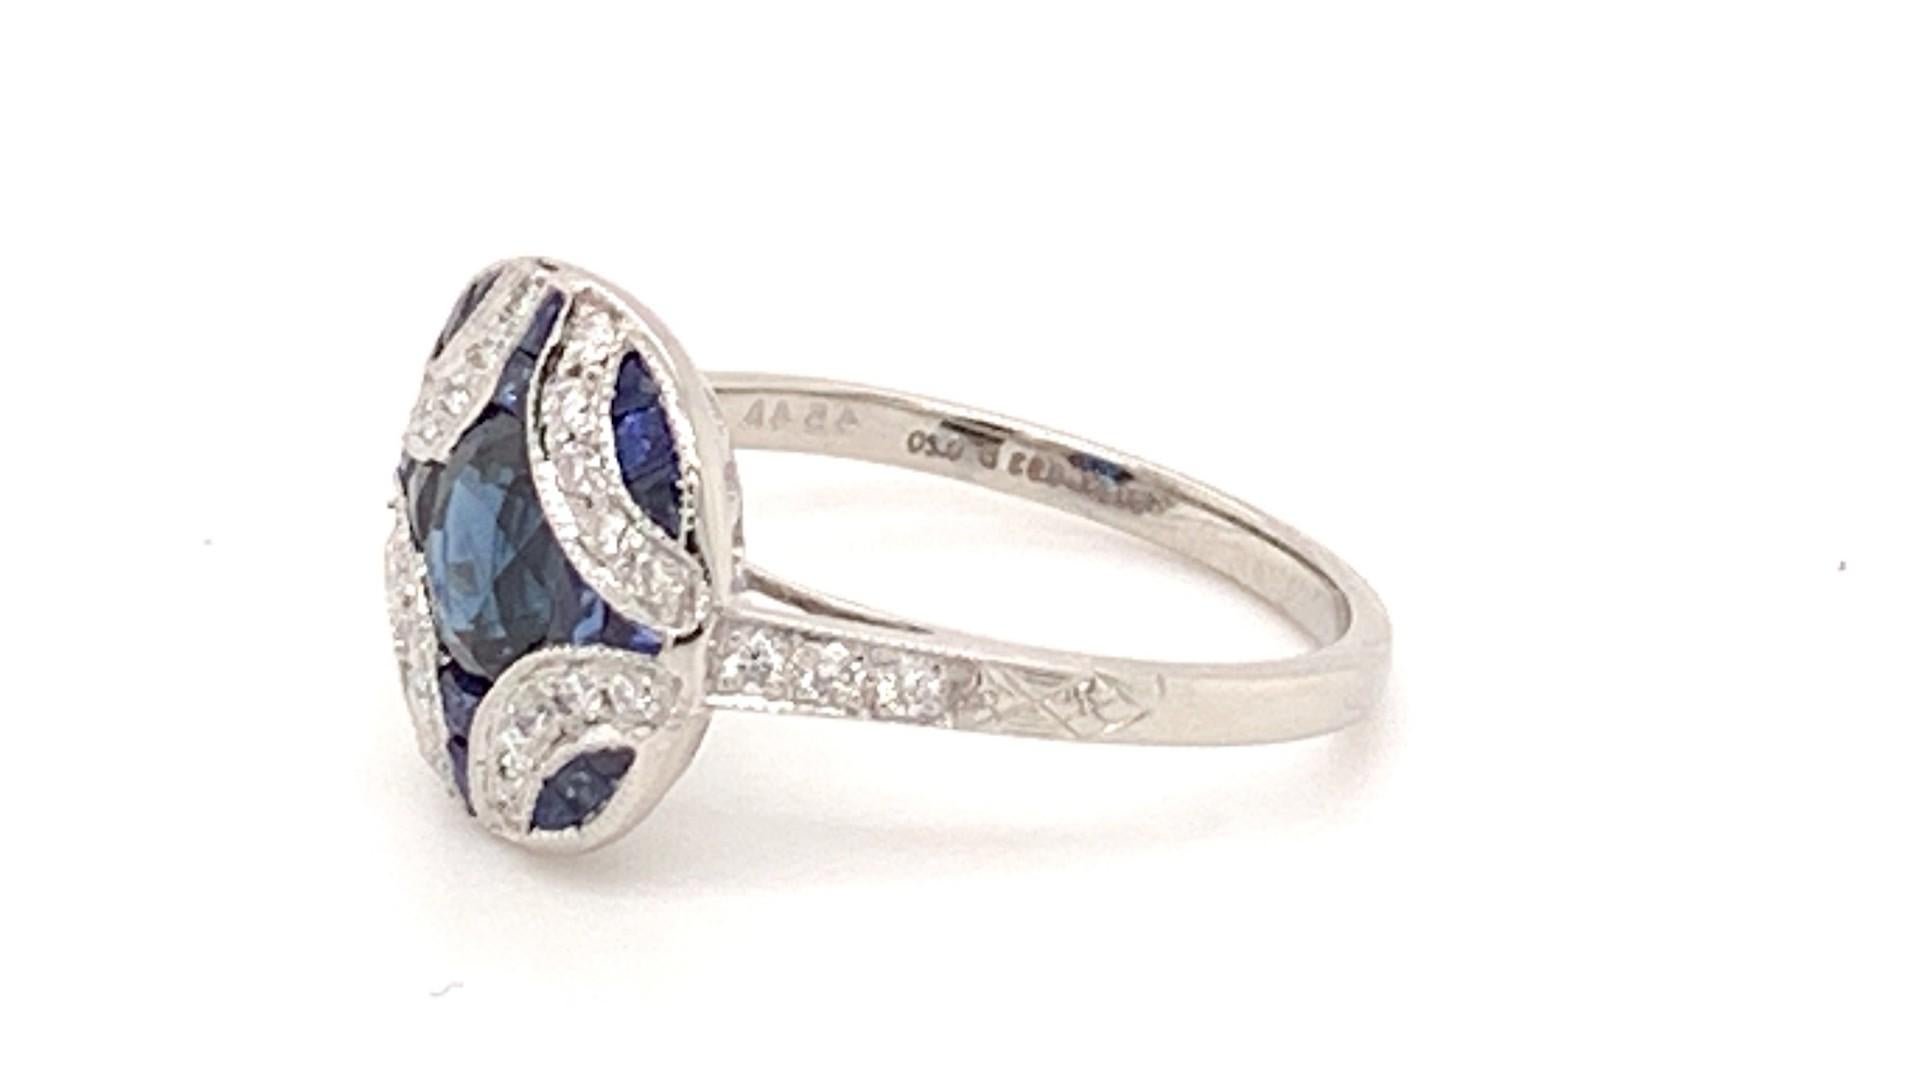 Stunning platinum with center sapphire weighing 0.93 carat accented with  small dazzling sapphires weighing 0.43 carat together with brilliant diamond stones weighing 0.20 carat designed  to enhance the overall style , beauty, personality,  and